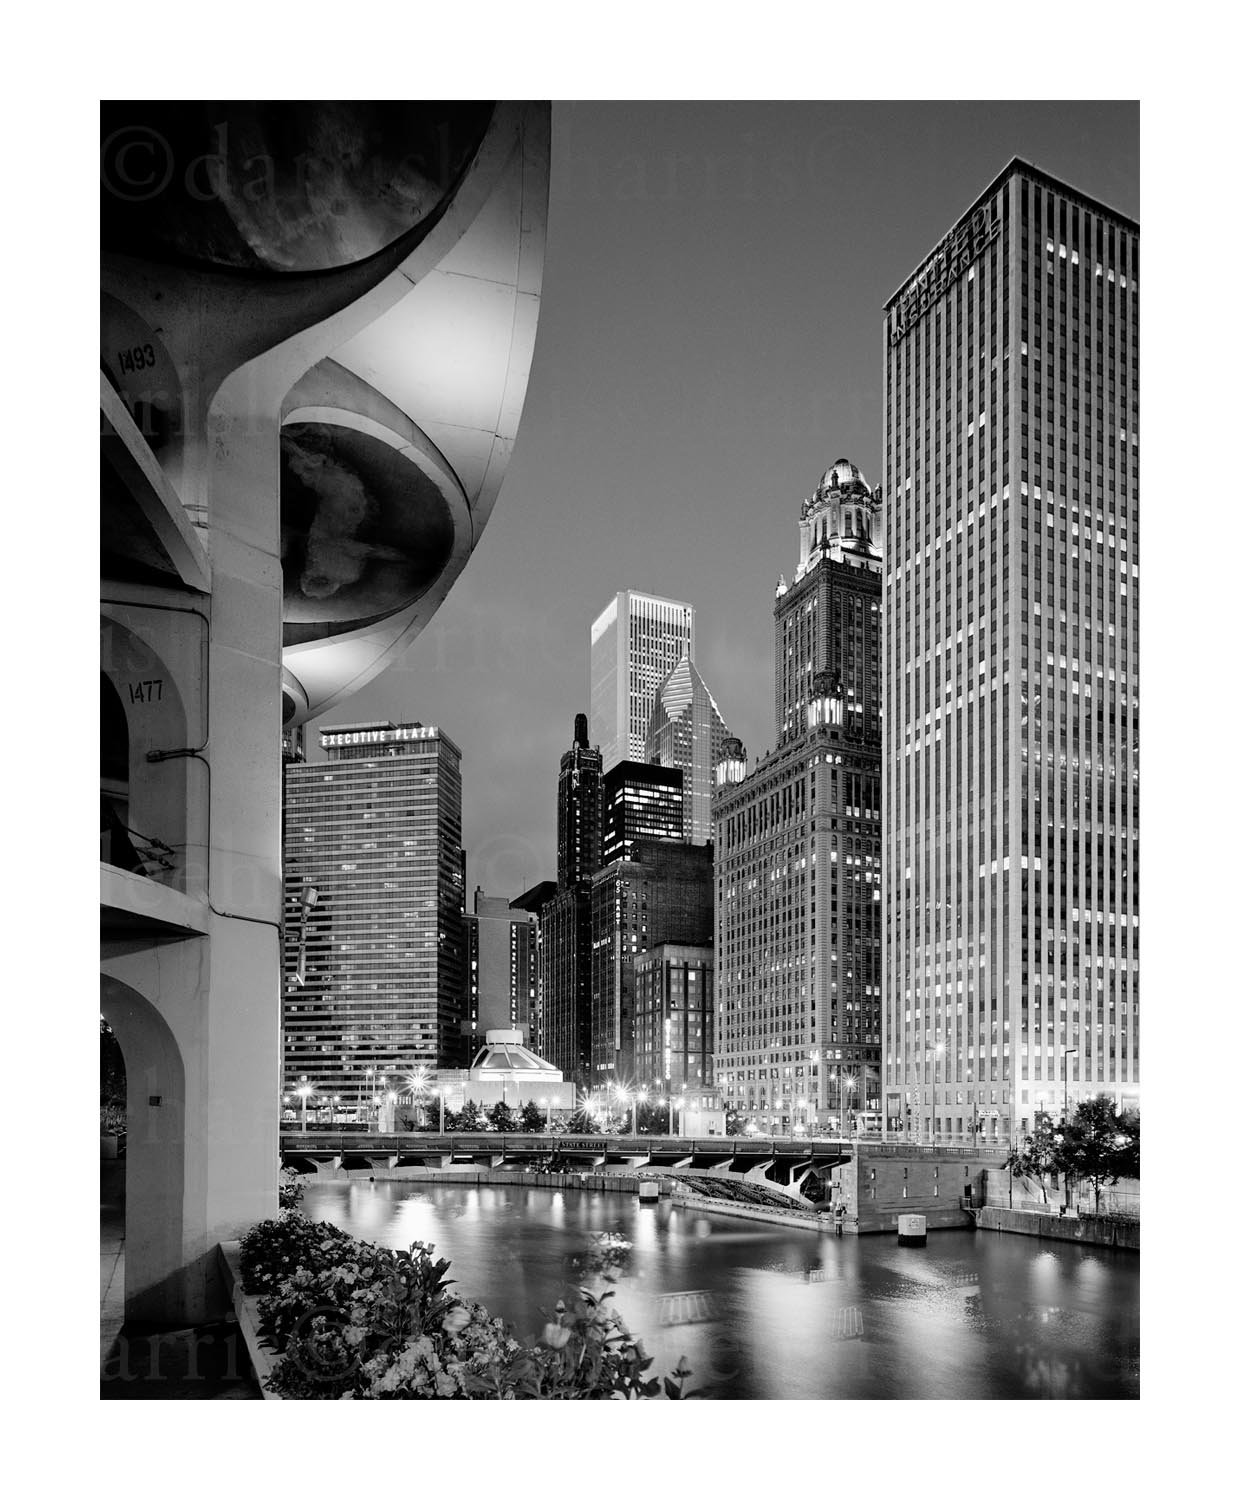 Dearborn Street at the Chicago River, 2000